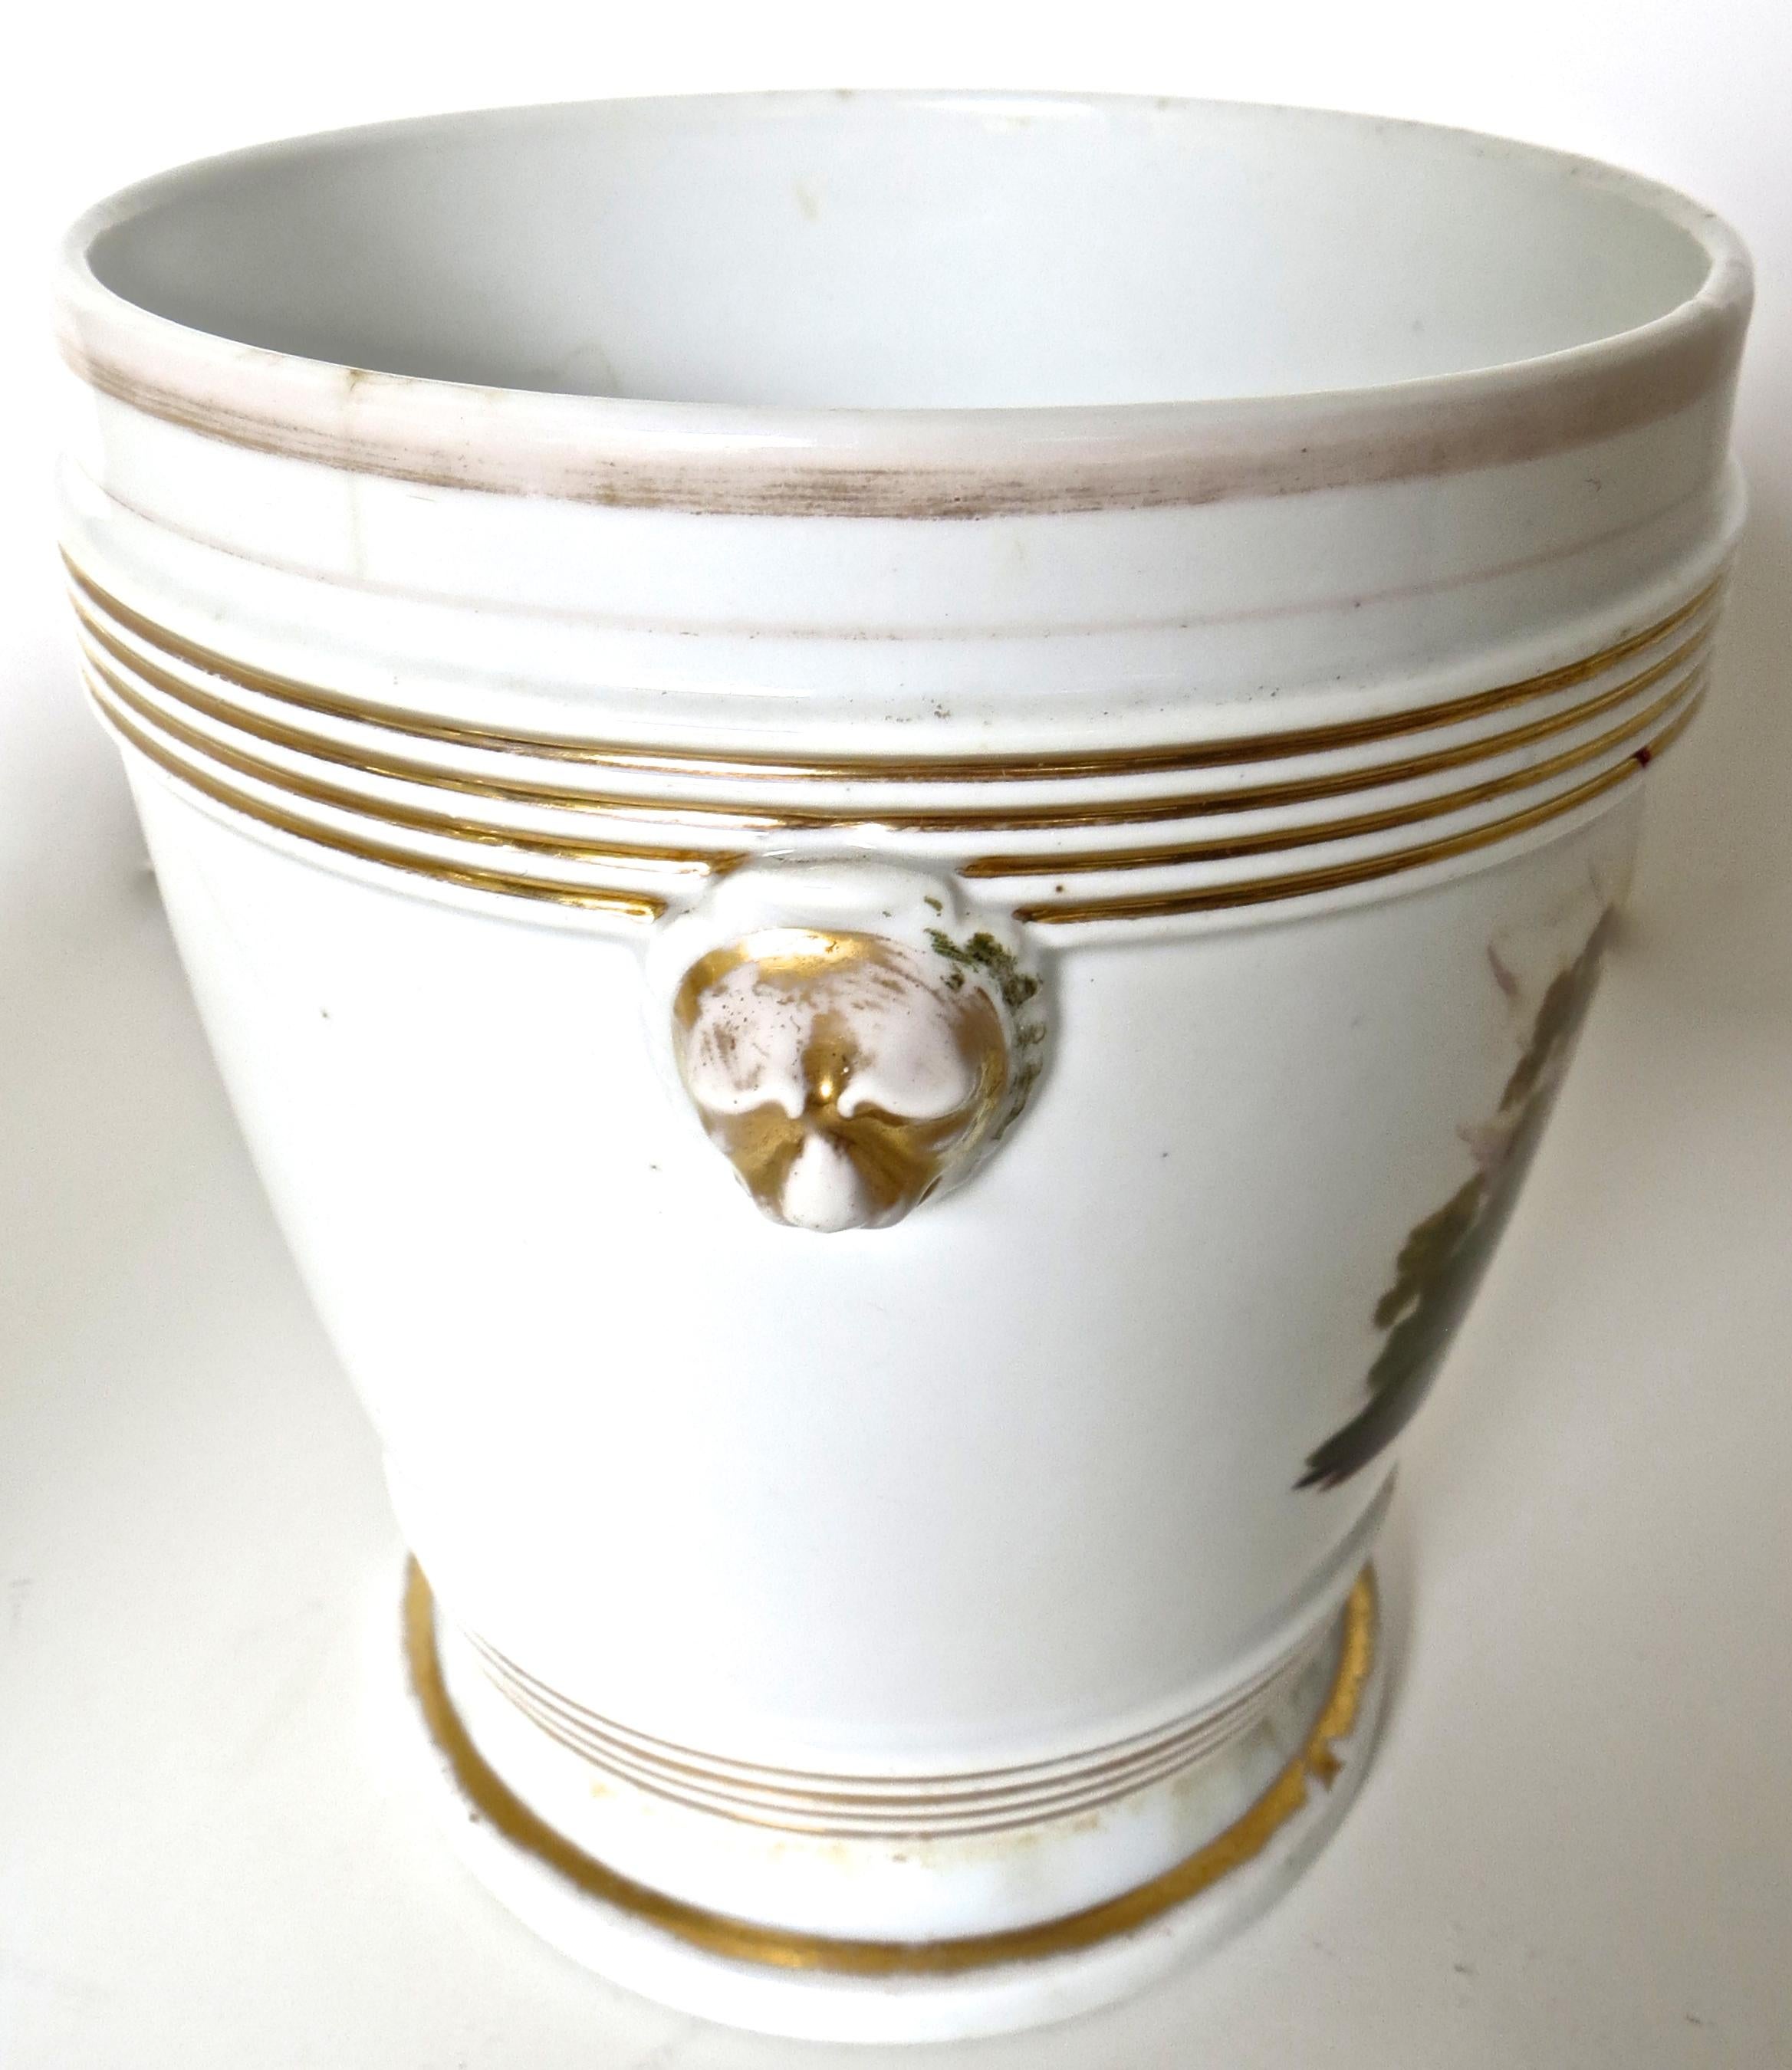 Late 18th Century English Faience Planter In Good Condition For Sale In Incline Village, NV